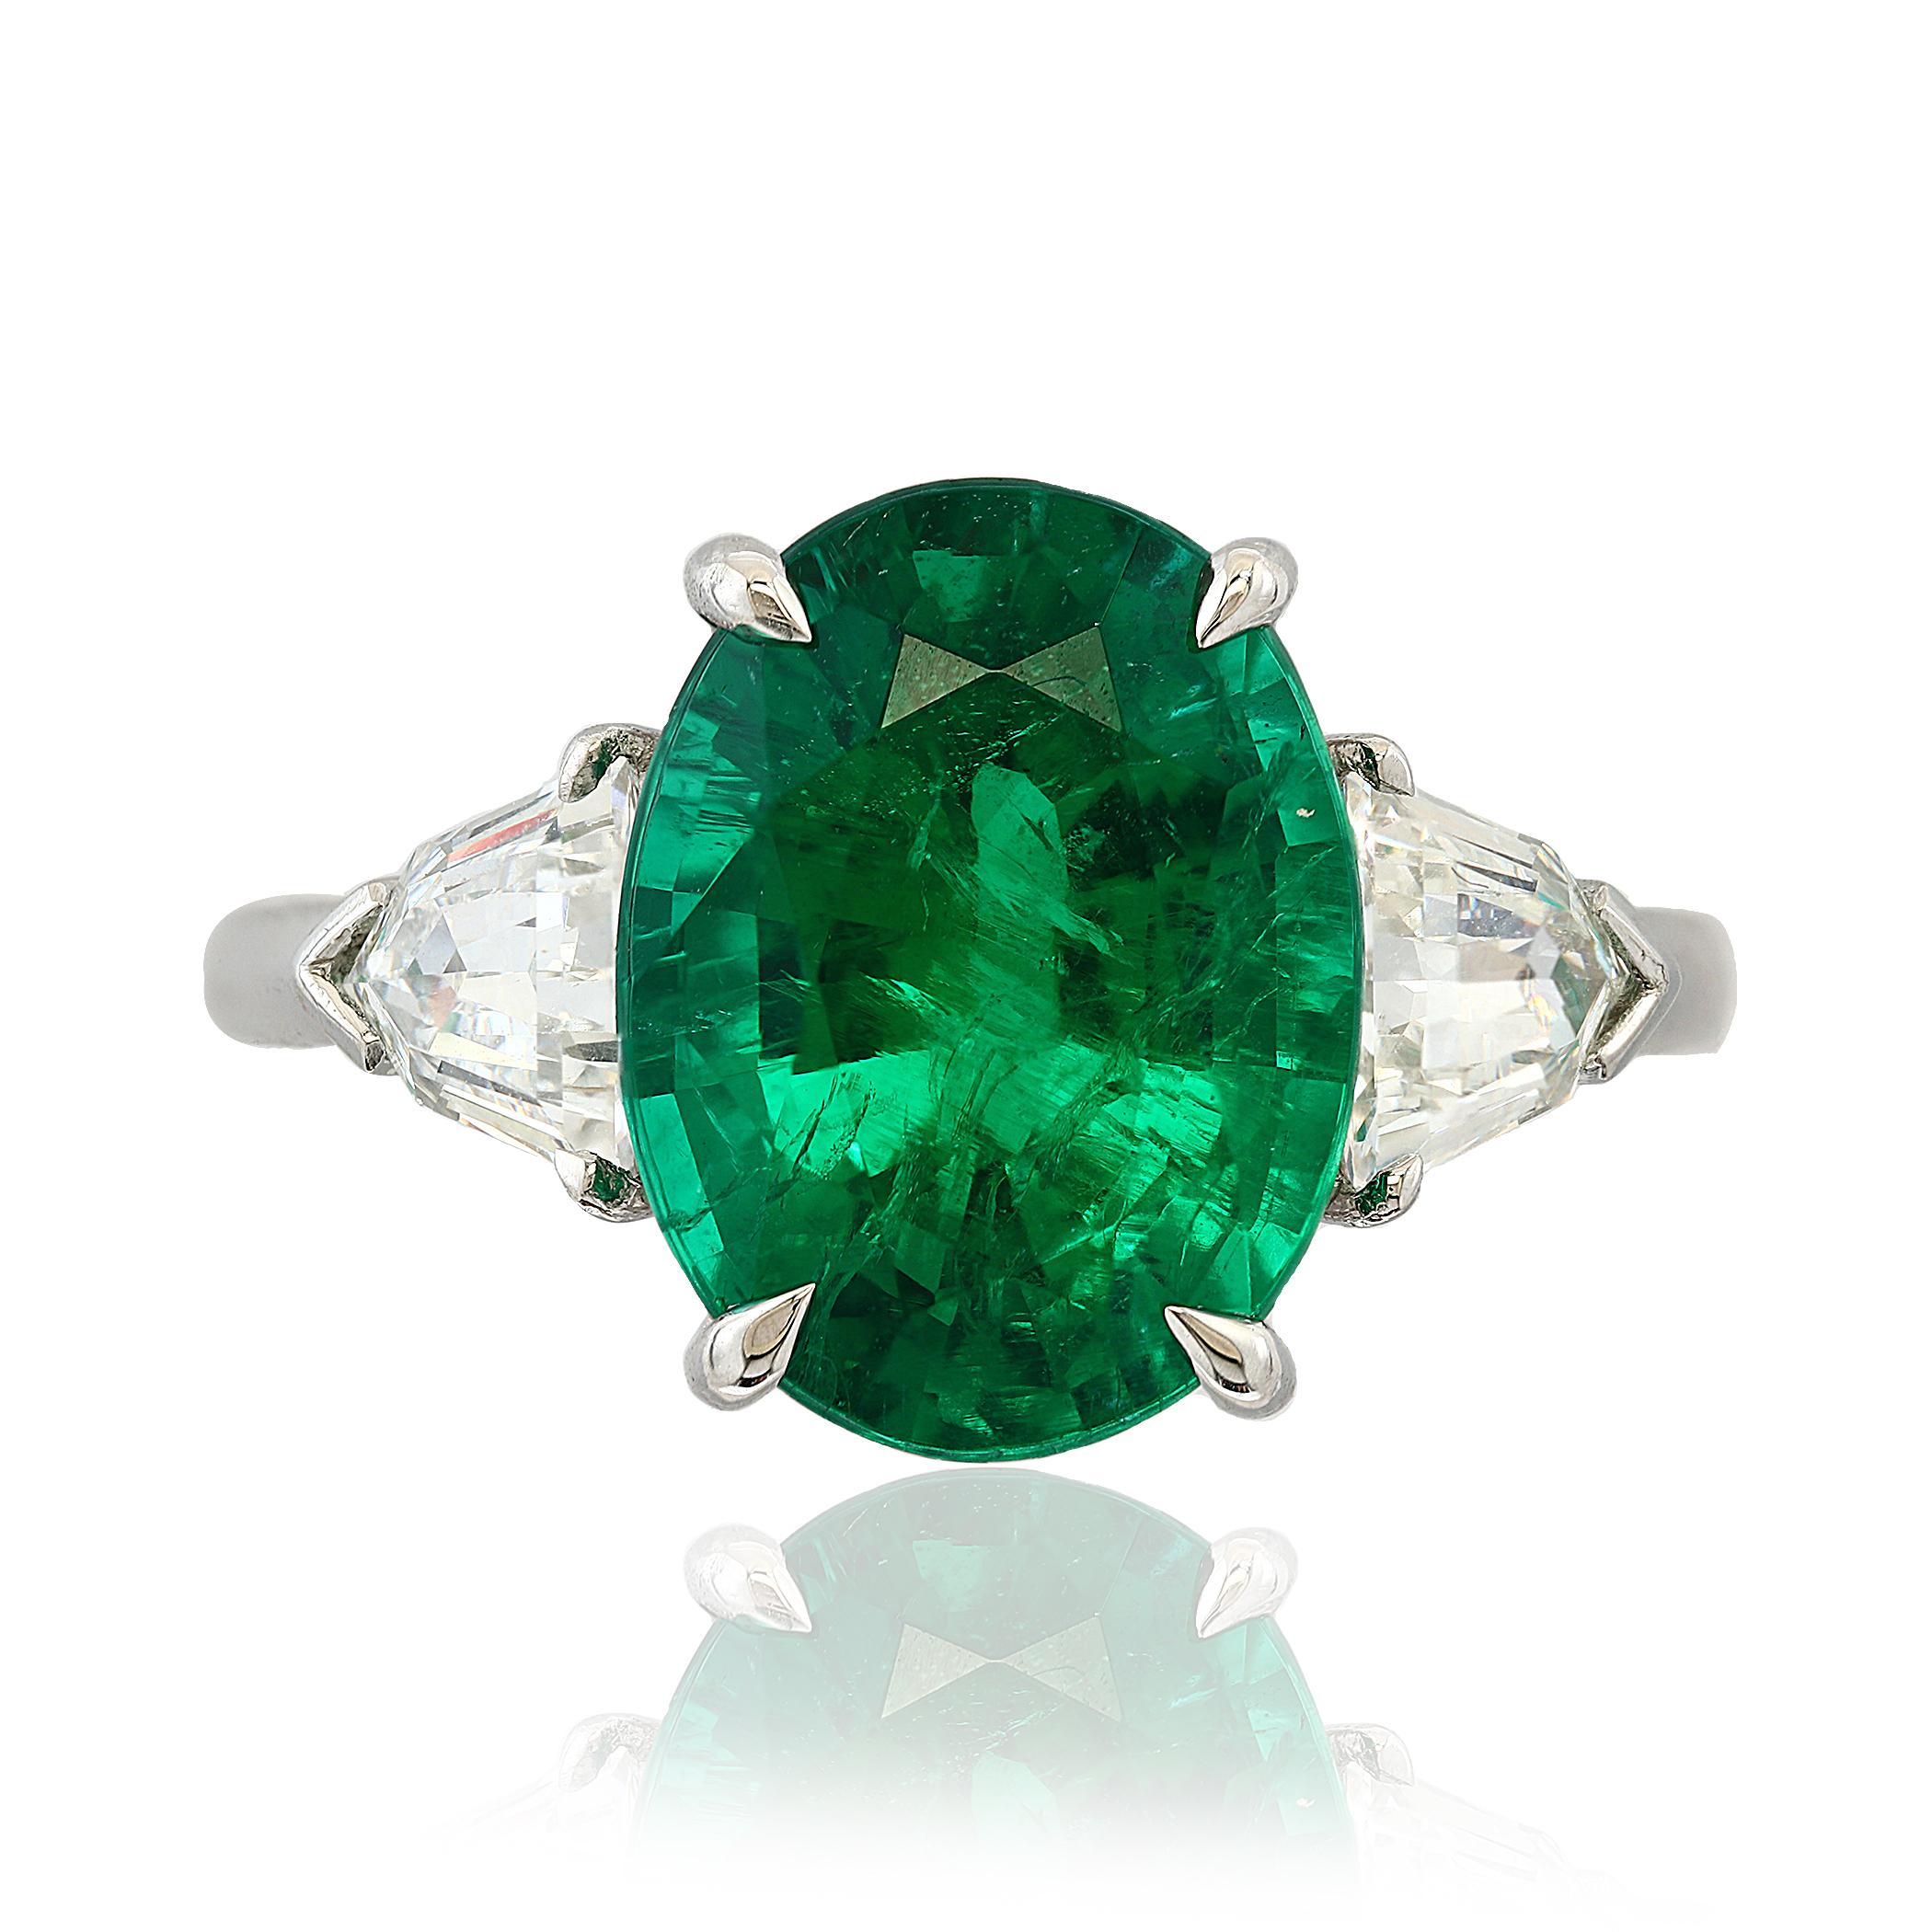 A timeless engagement ring style showcasing a 4.66 carat oval cut  green emerald, flanked by brilliant trillion diamonds on each side. Diamonds weigh 0.90 carats total. Made in platinum.